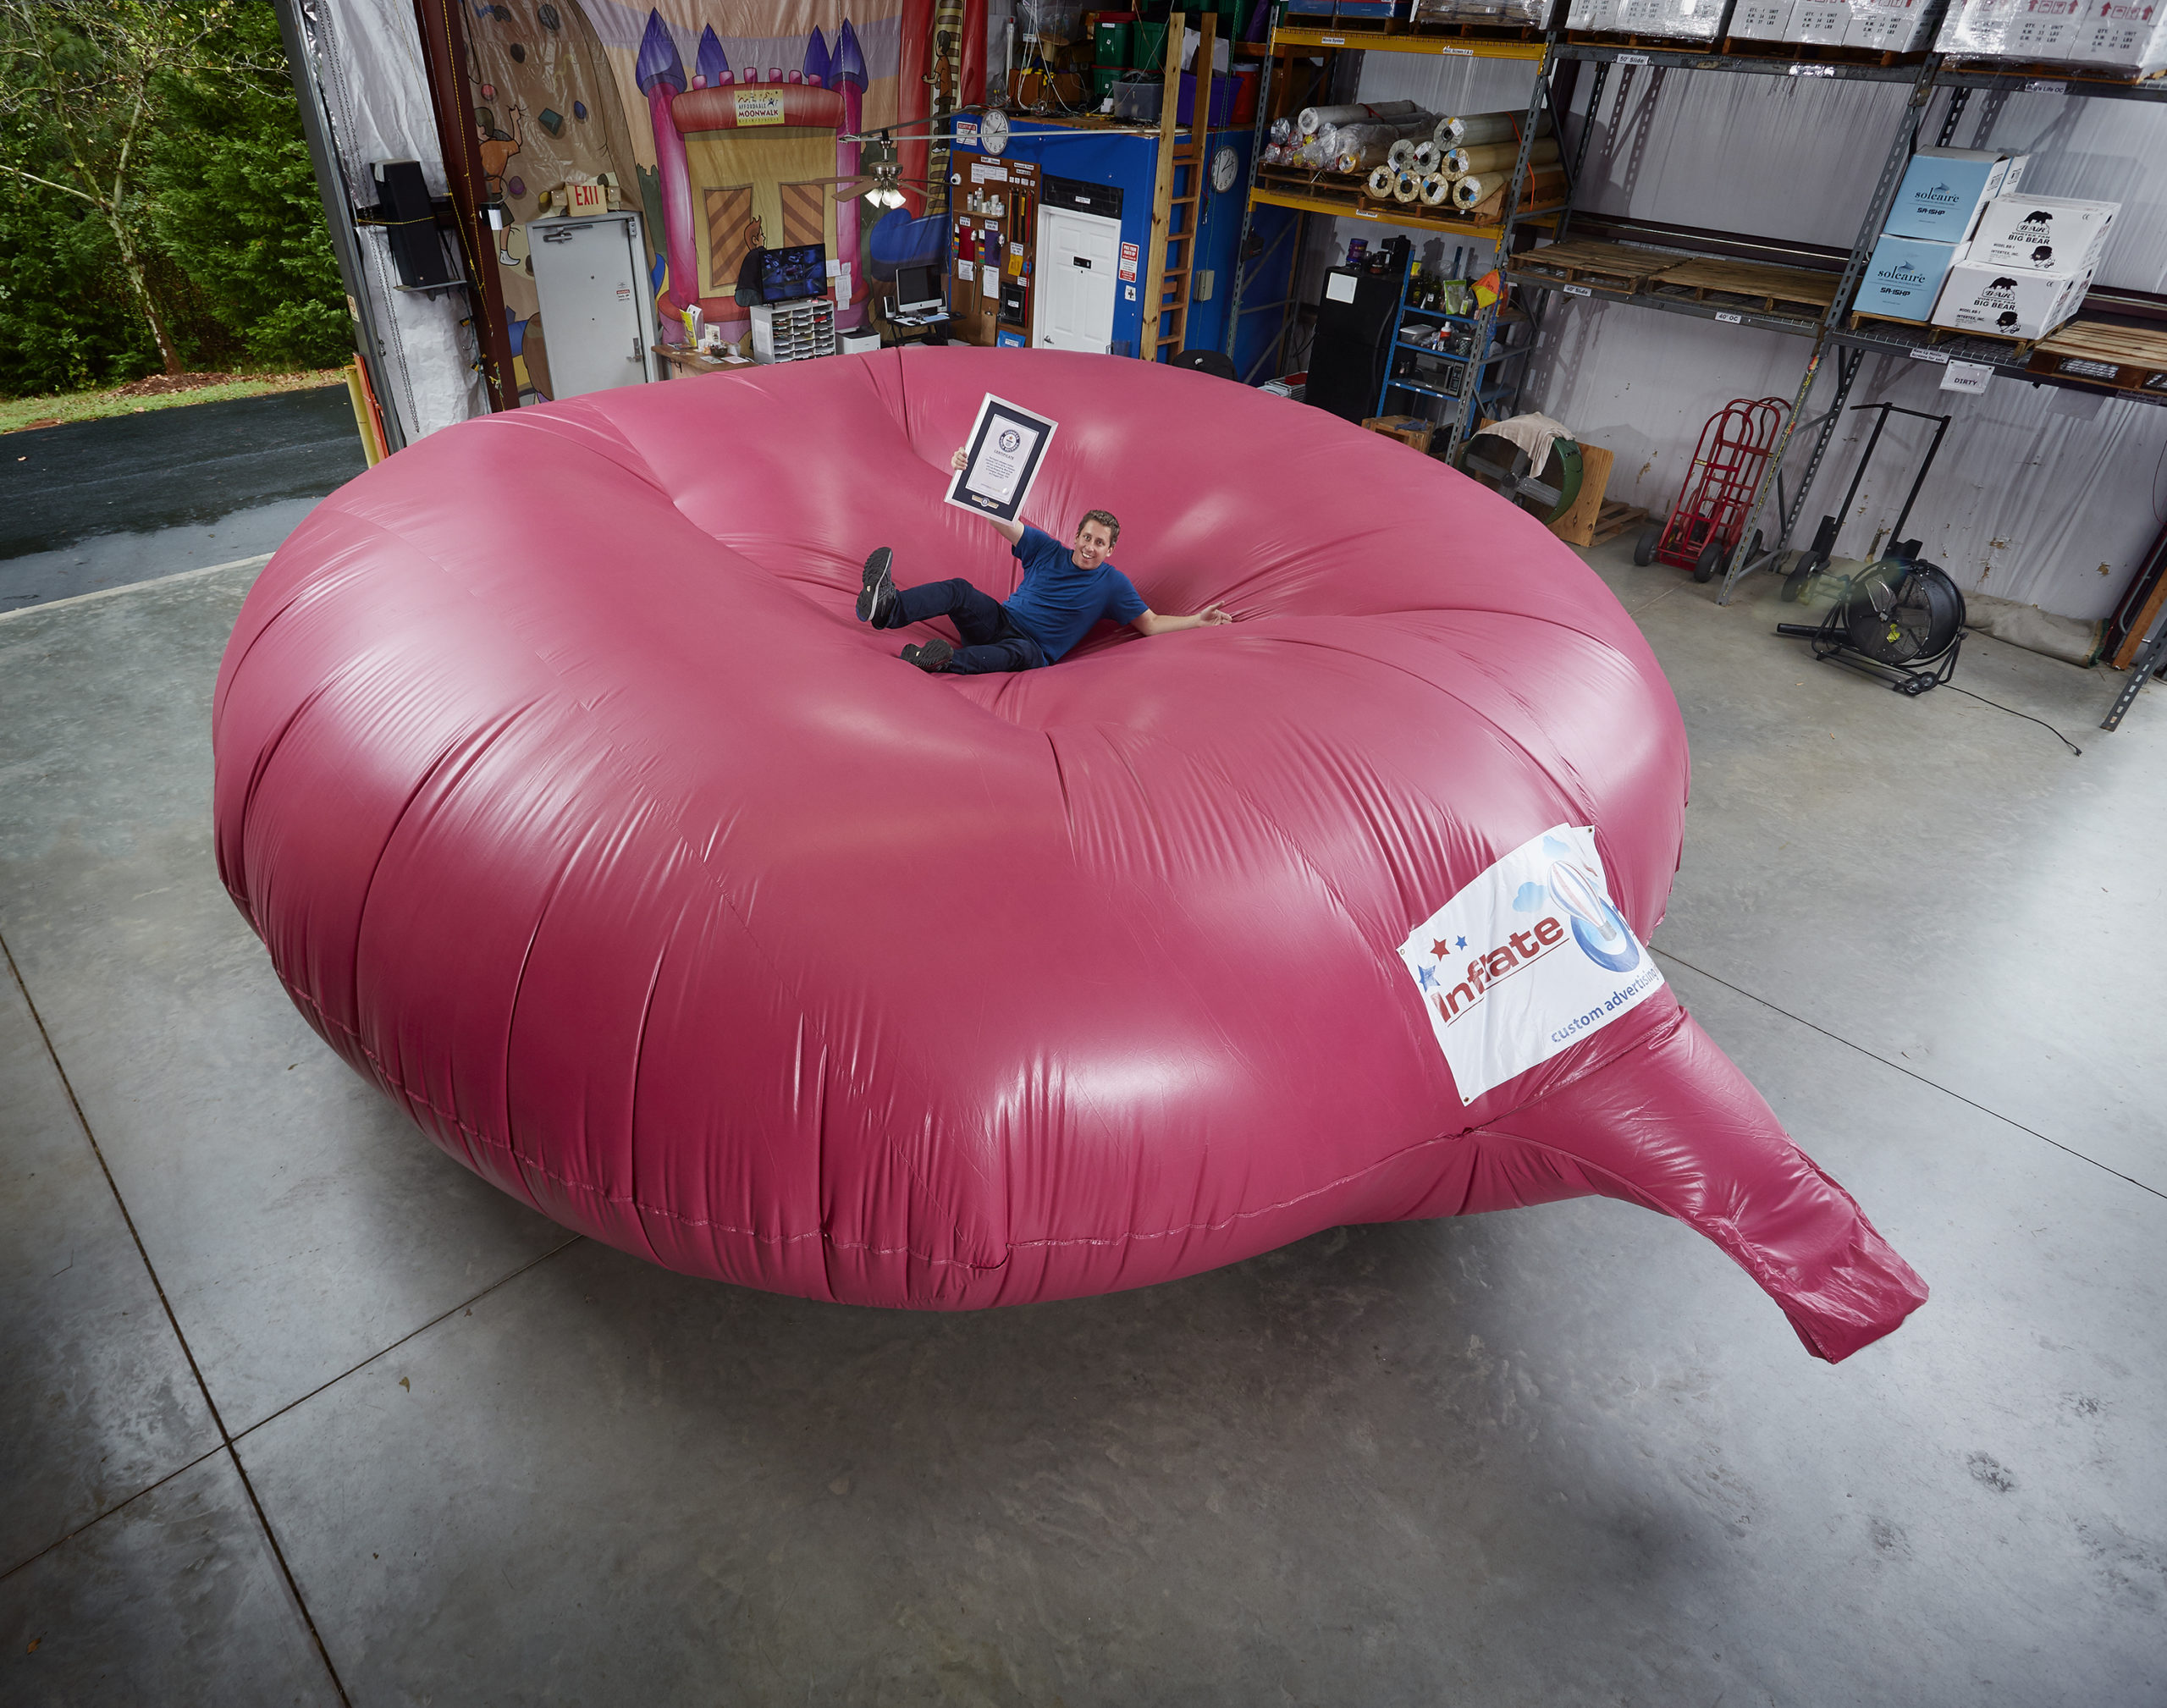 Largest Whoopee Cushion Guinness World Records 2020 Photo Credit: Kevin Scott Ramos/Guinness World Records